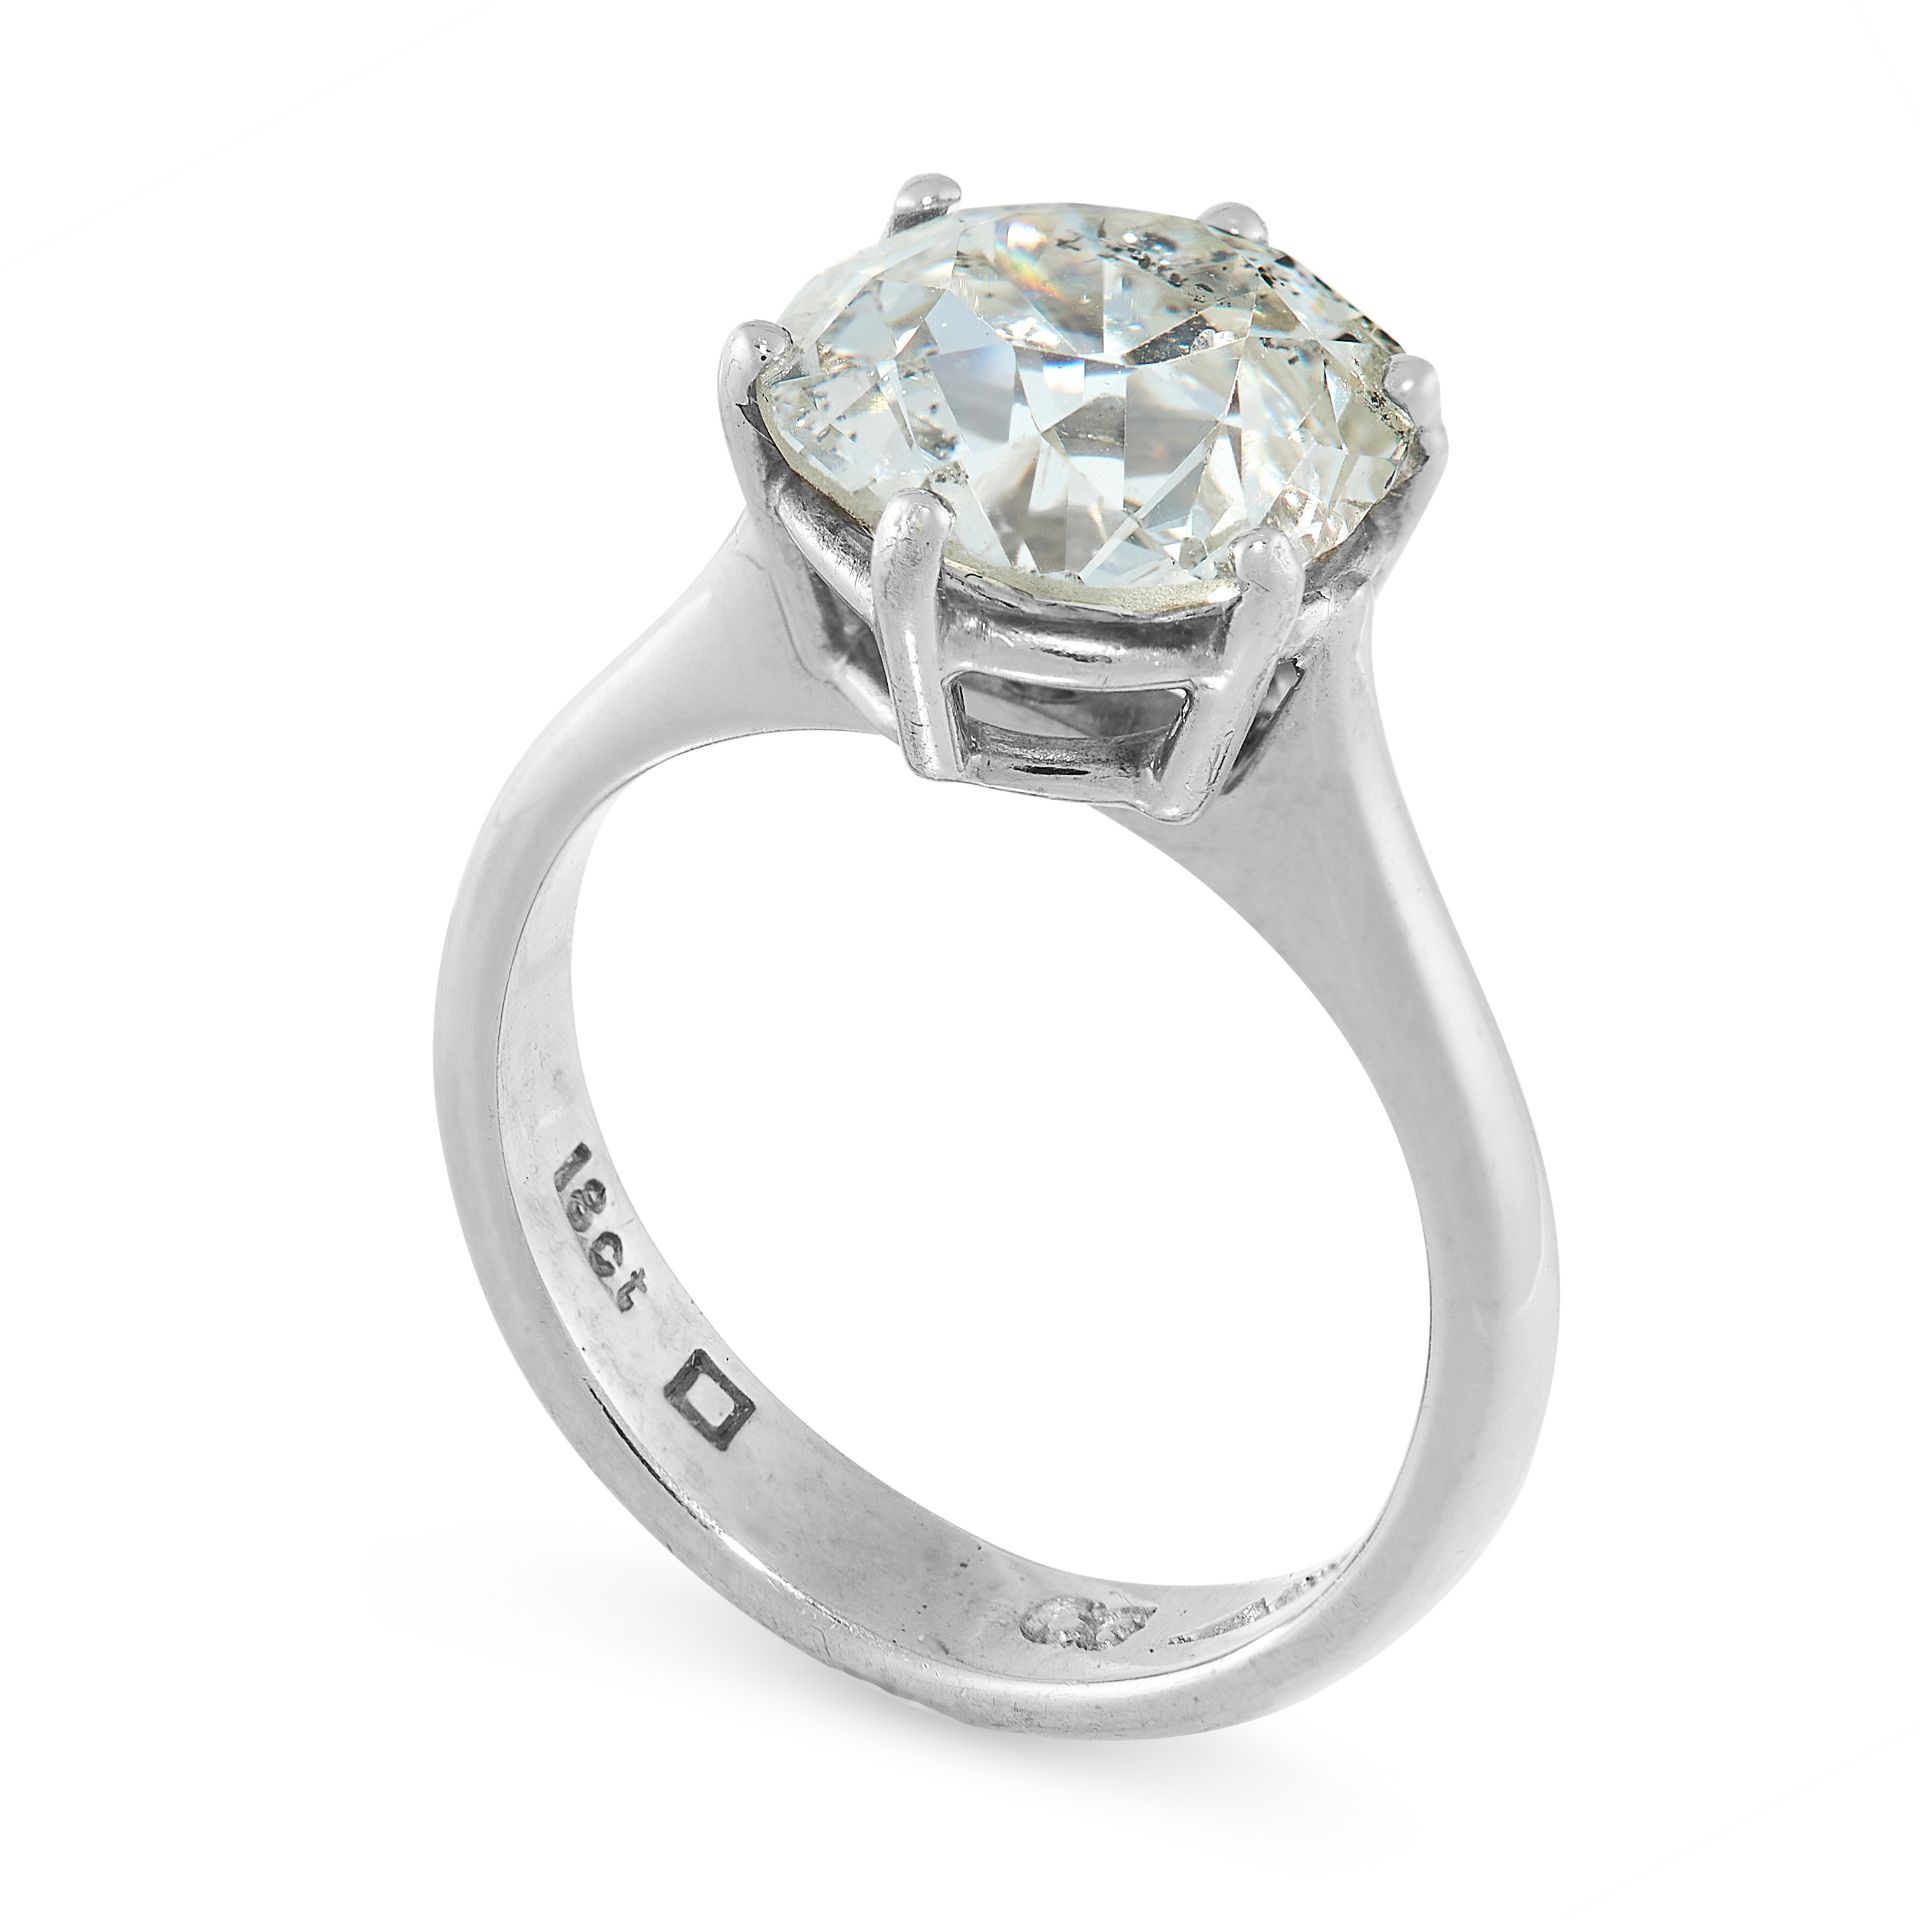 DIAMOND SOLITAIRE RING in 18ct white gold, comprising of an old cut diamond of 3.60 carats, - Image 2 of 2